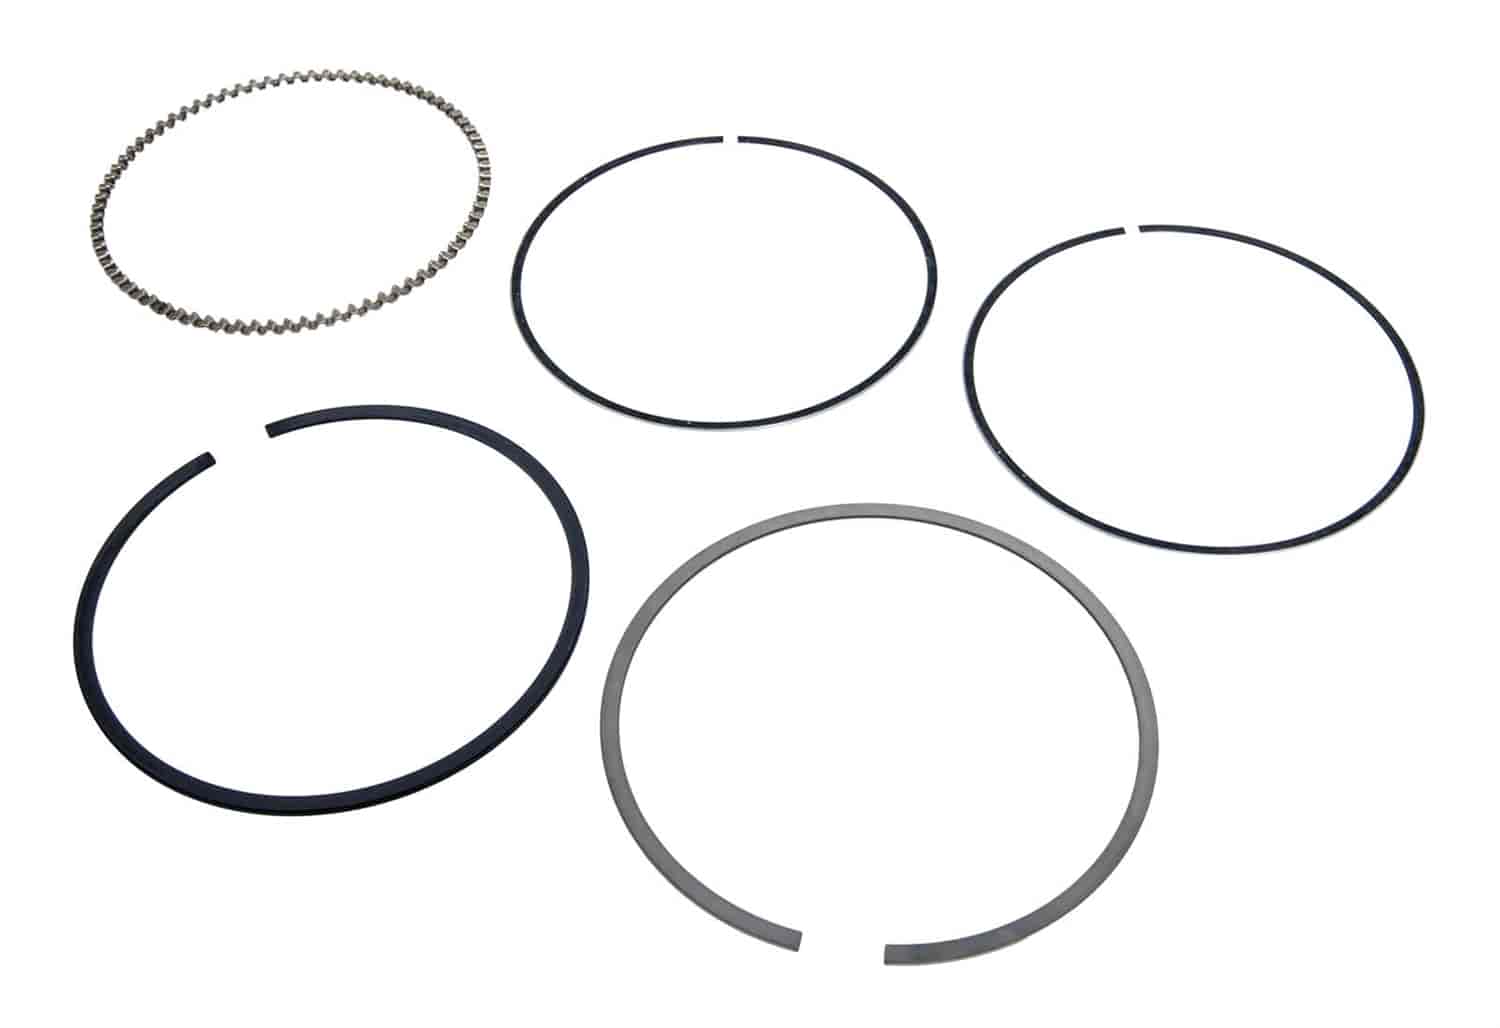 104.95MM 4.132IN. Auto RING SET- 1 cyl.